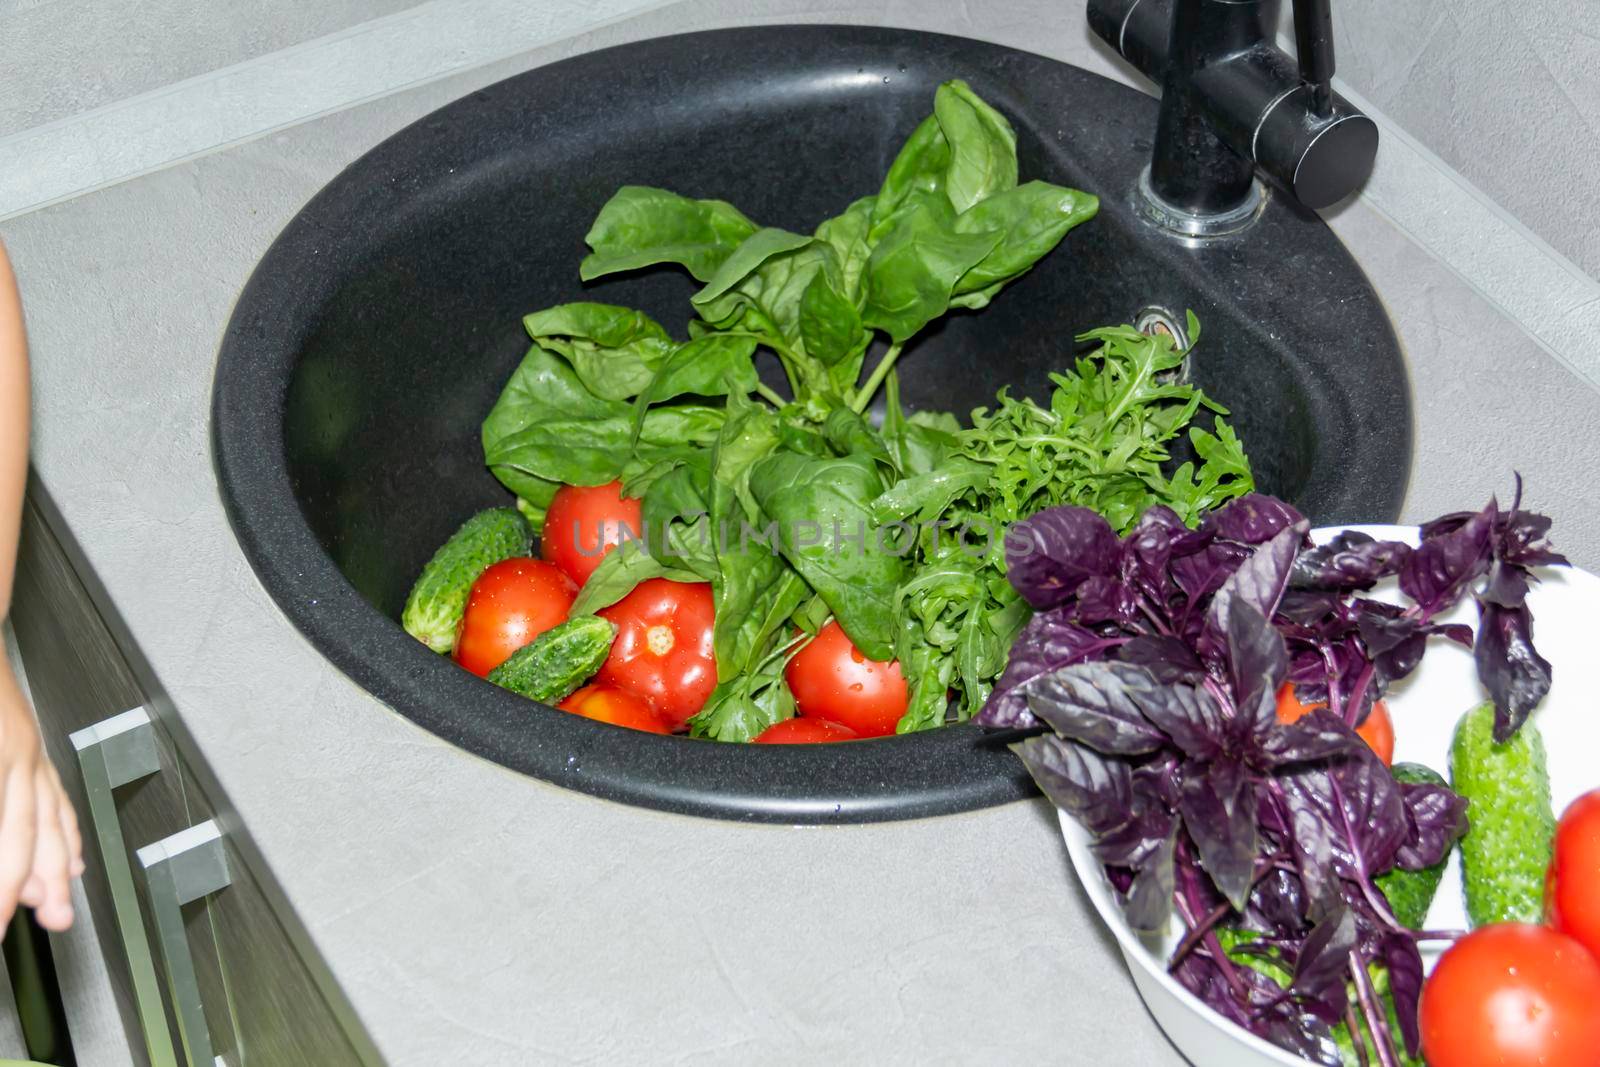 Spinach, arugula, cucumbers, tomatoes, basil collected at their dacha are washed in a black sink for cooking delicious and fragrant dishes...